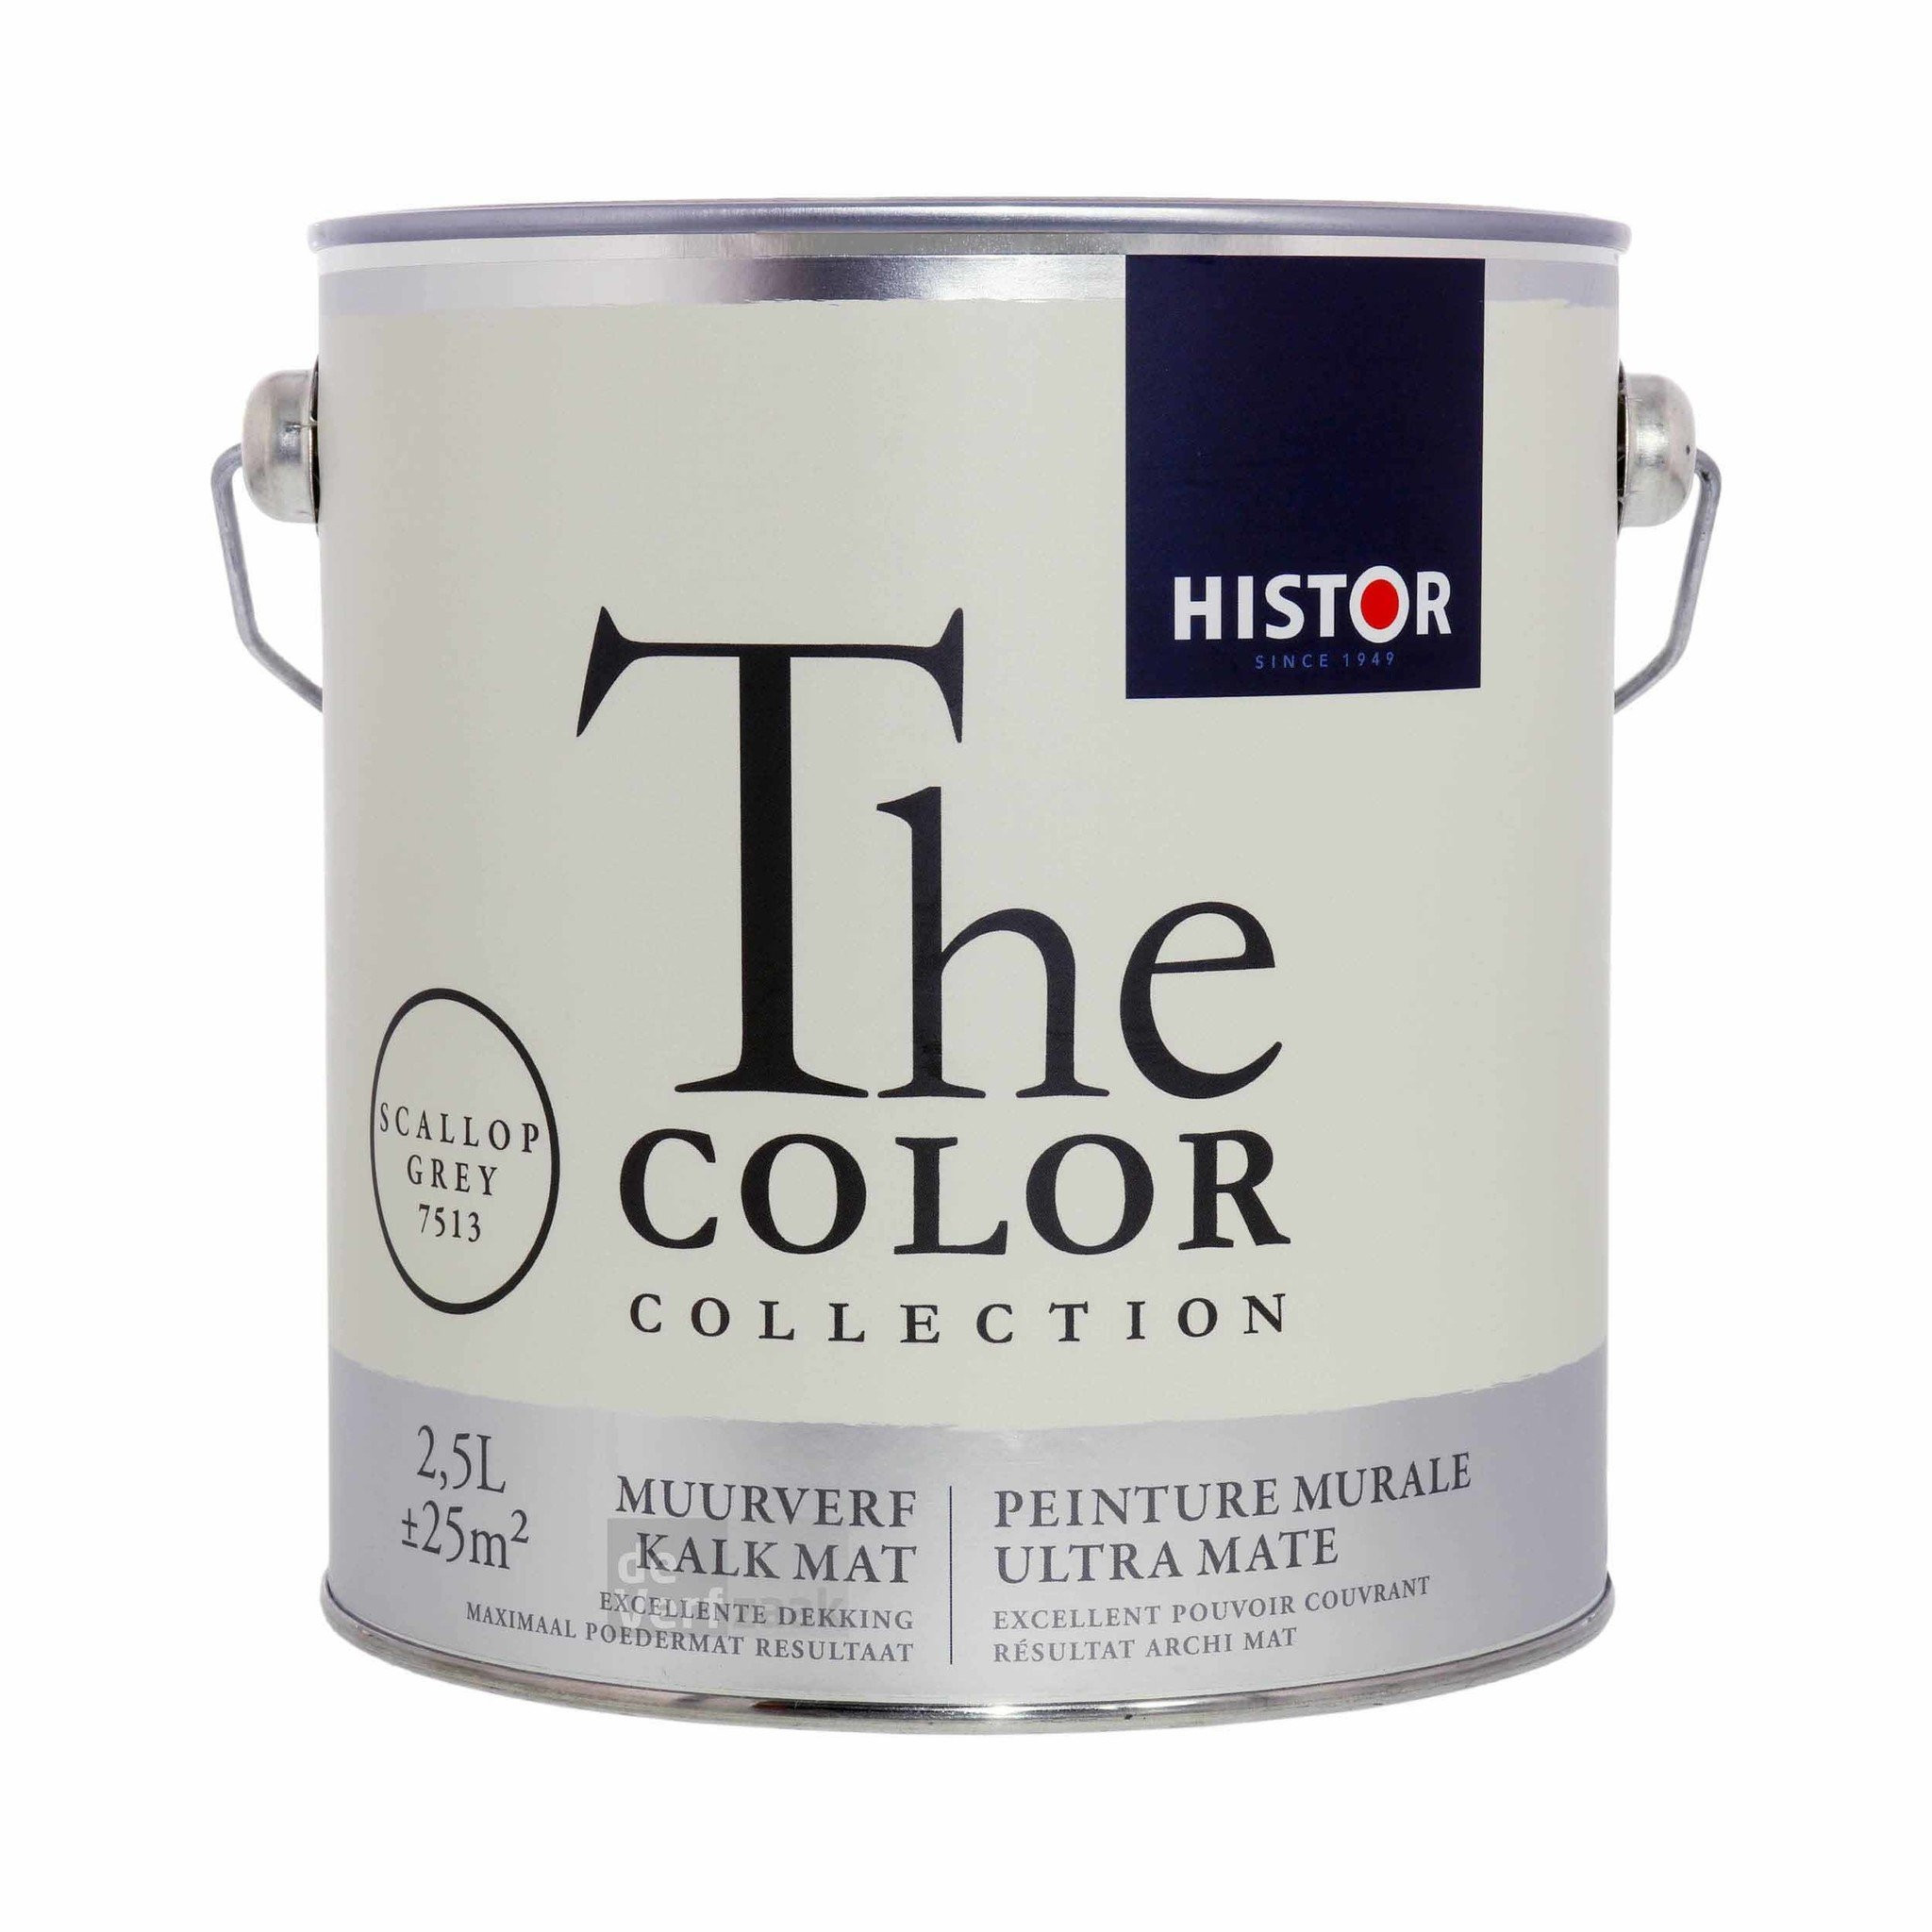 Histor The Color Collection Muurverf Kalkmat - Scallop Grey - 2,5 liter